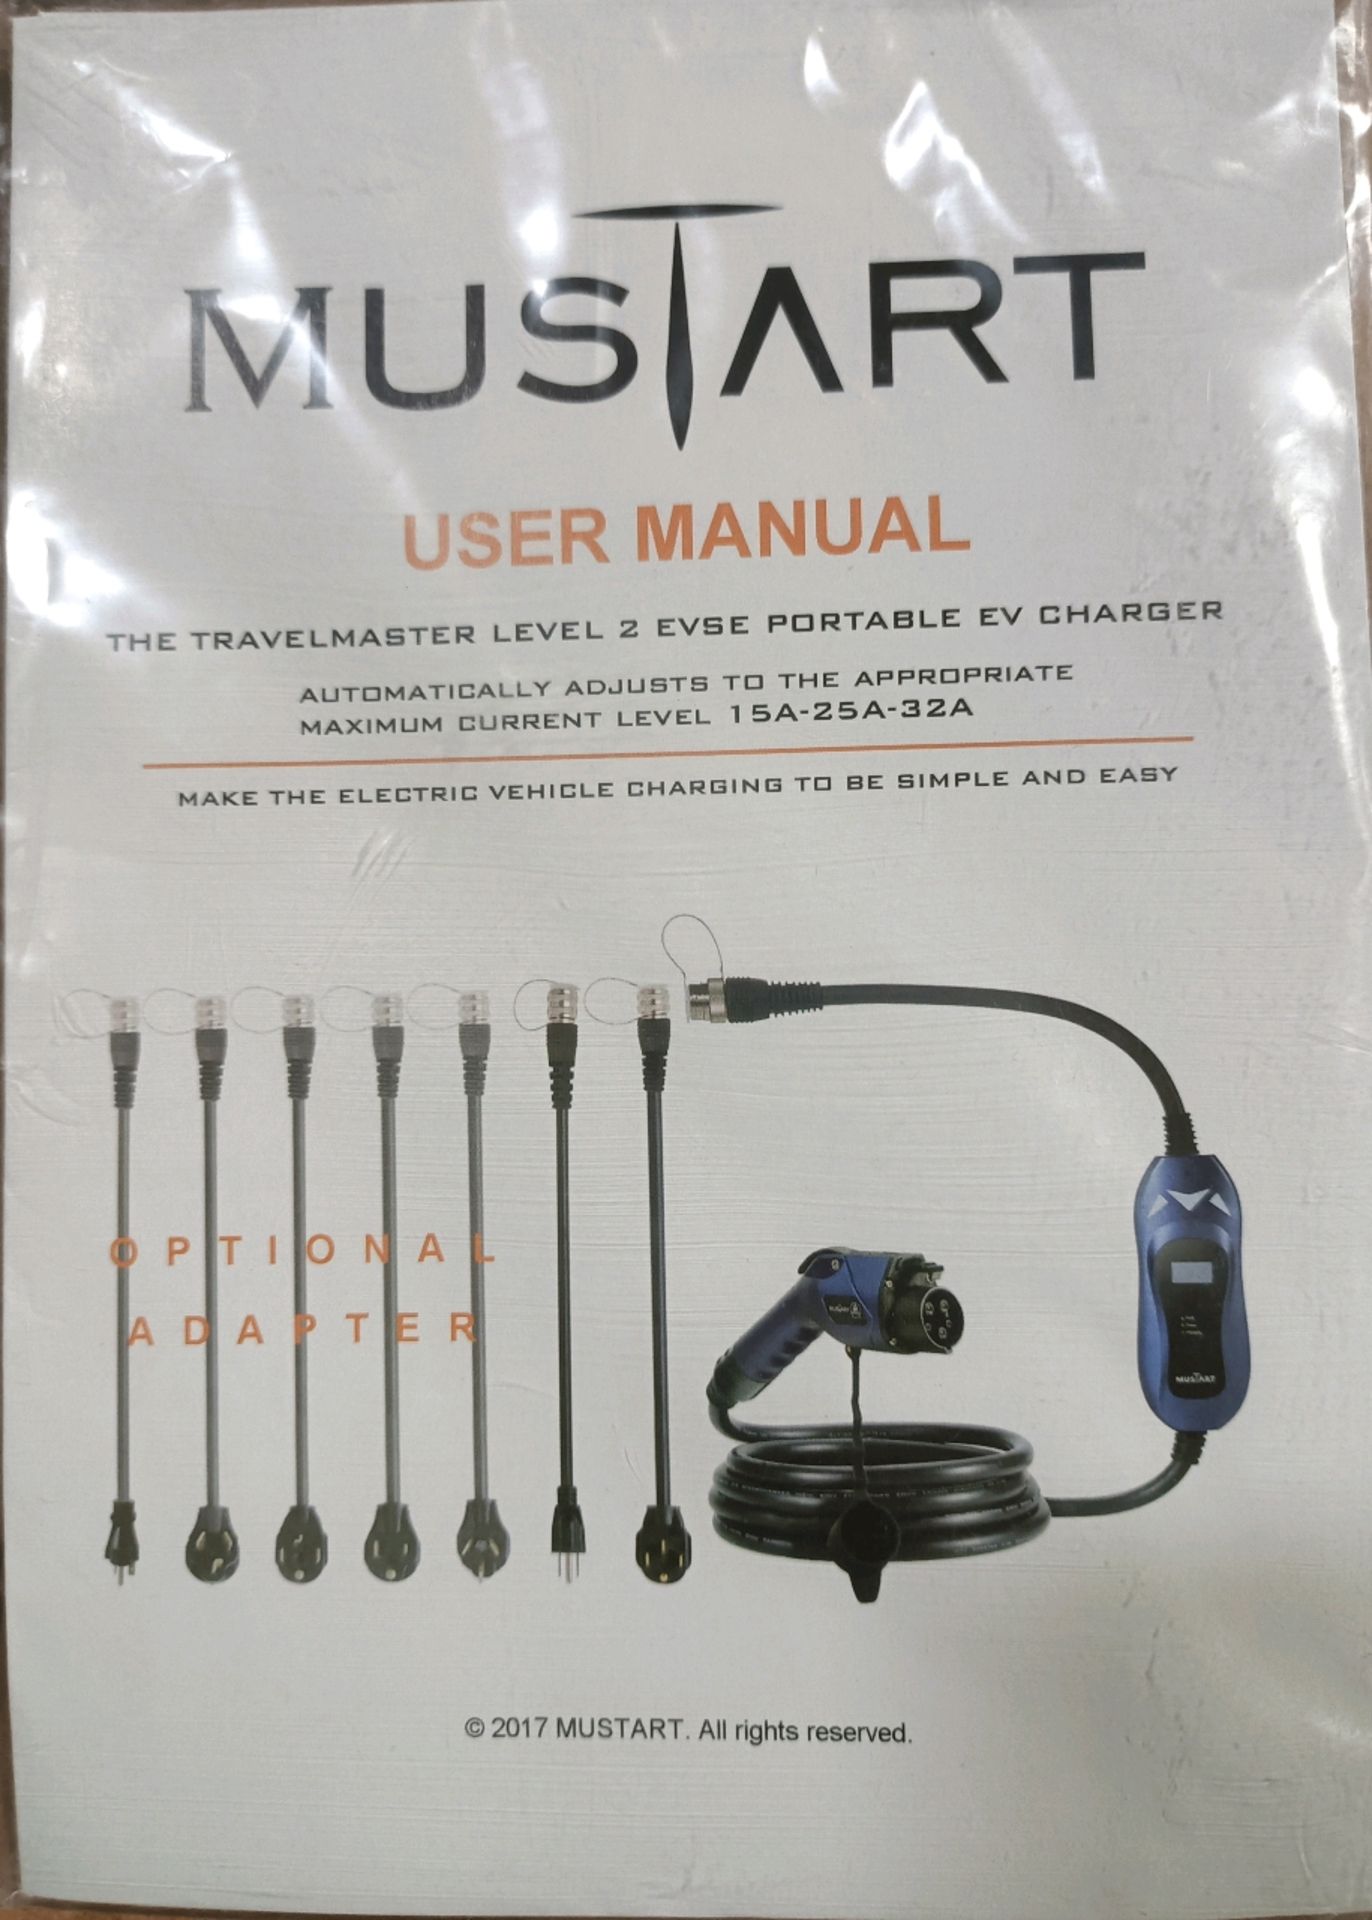 Mustart Portable Level 2 Charger - Image 3 of 6